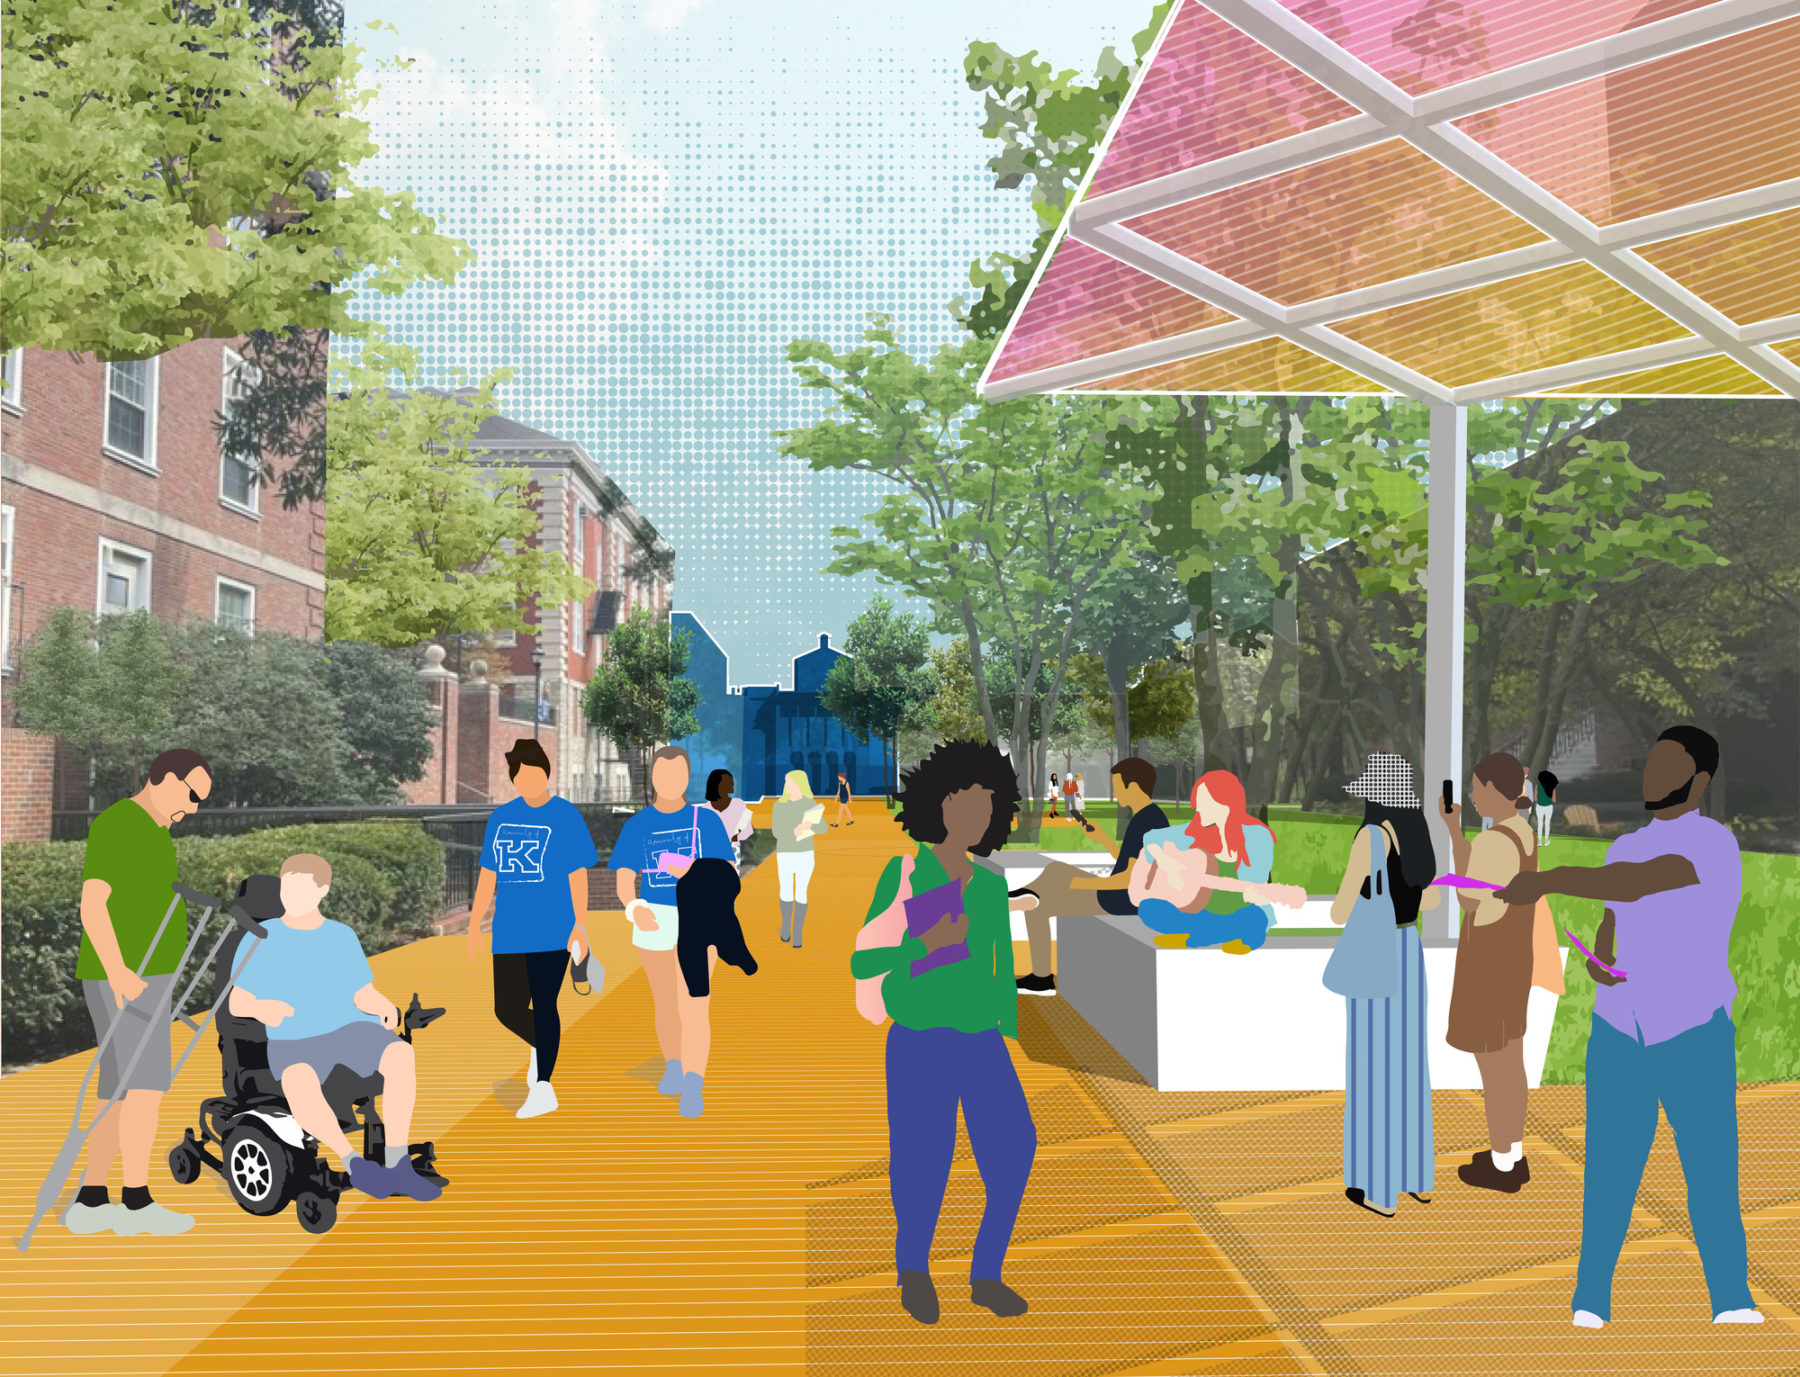 rendering of UK campus plaza students of all ethnicities and ability levels move along the plaza